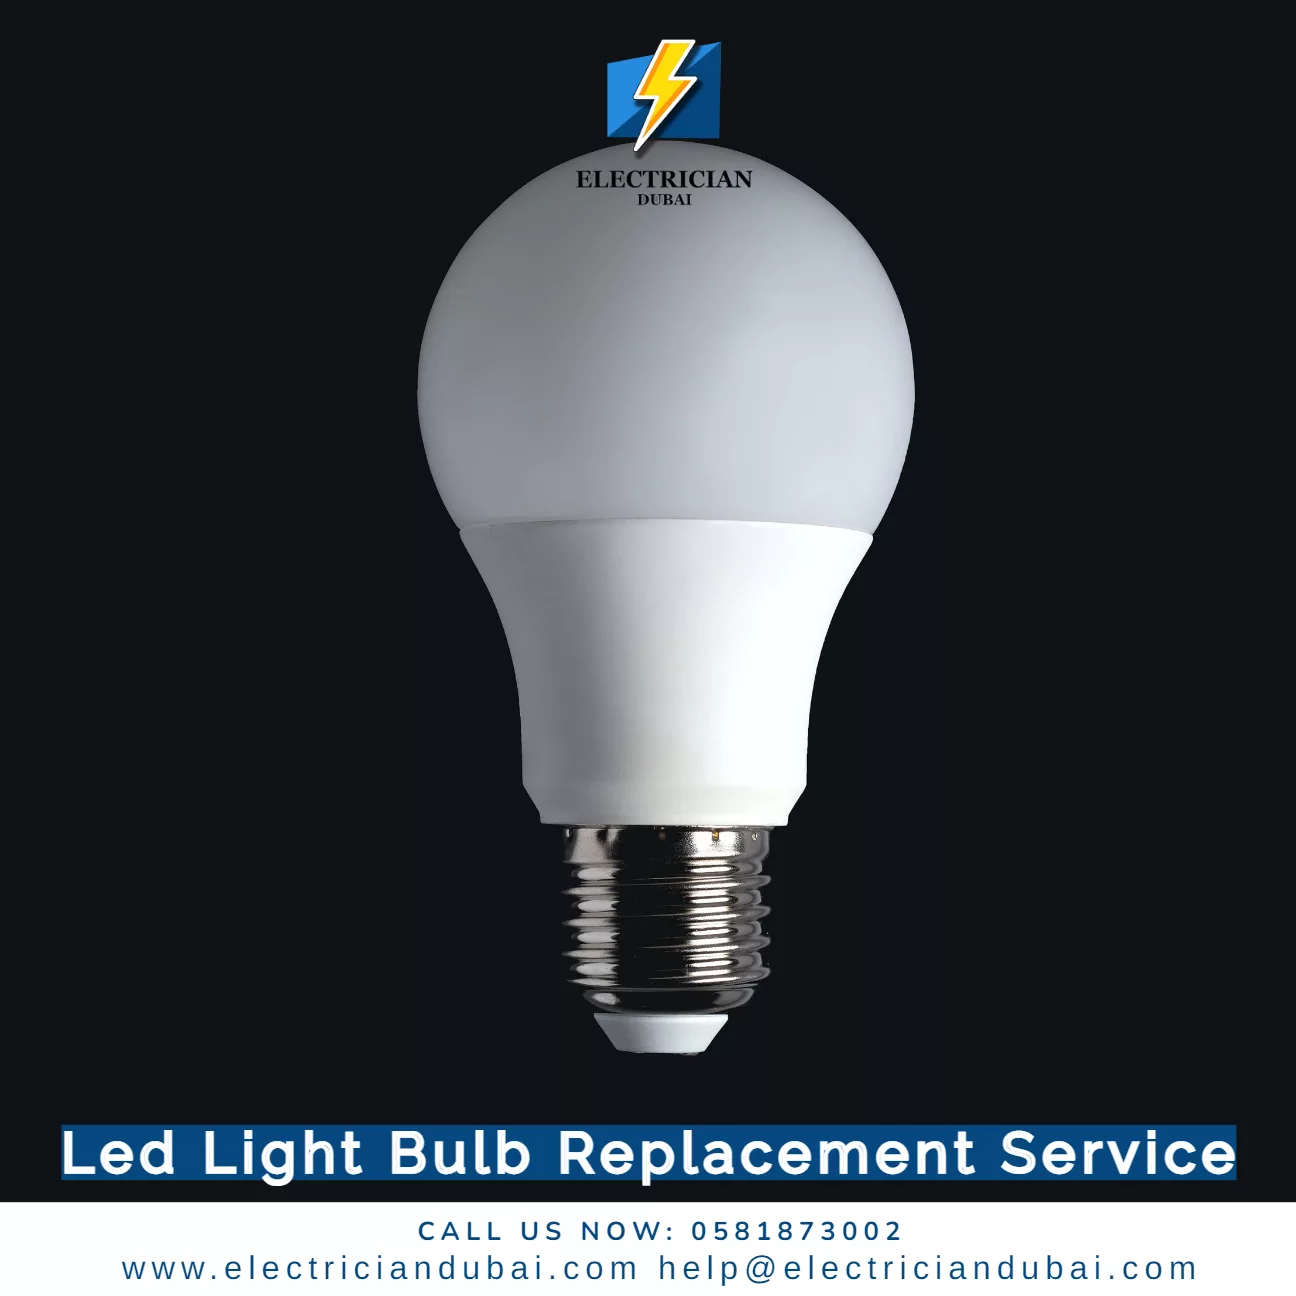 Led Light Bulb Replacement Service